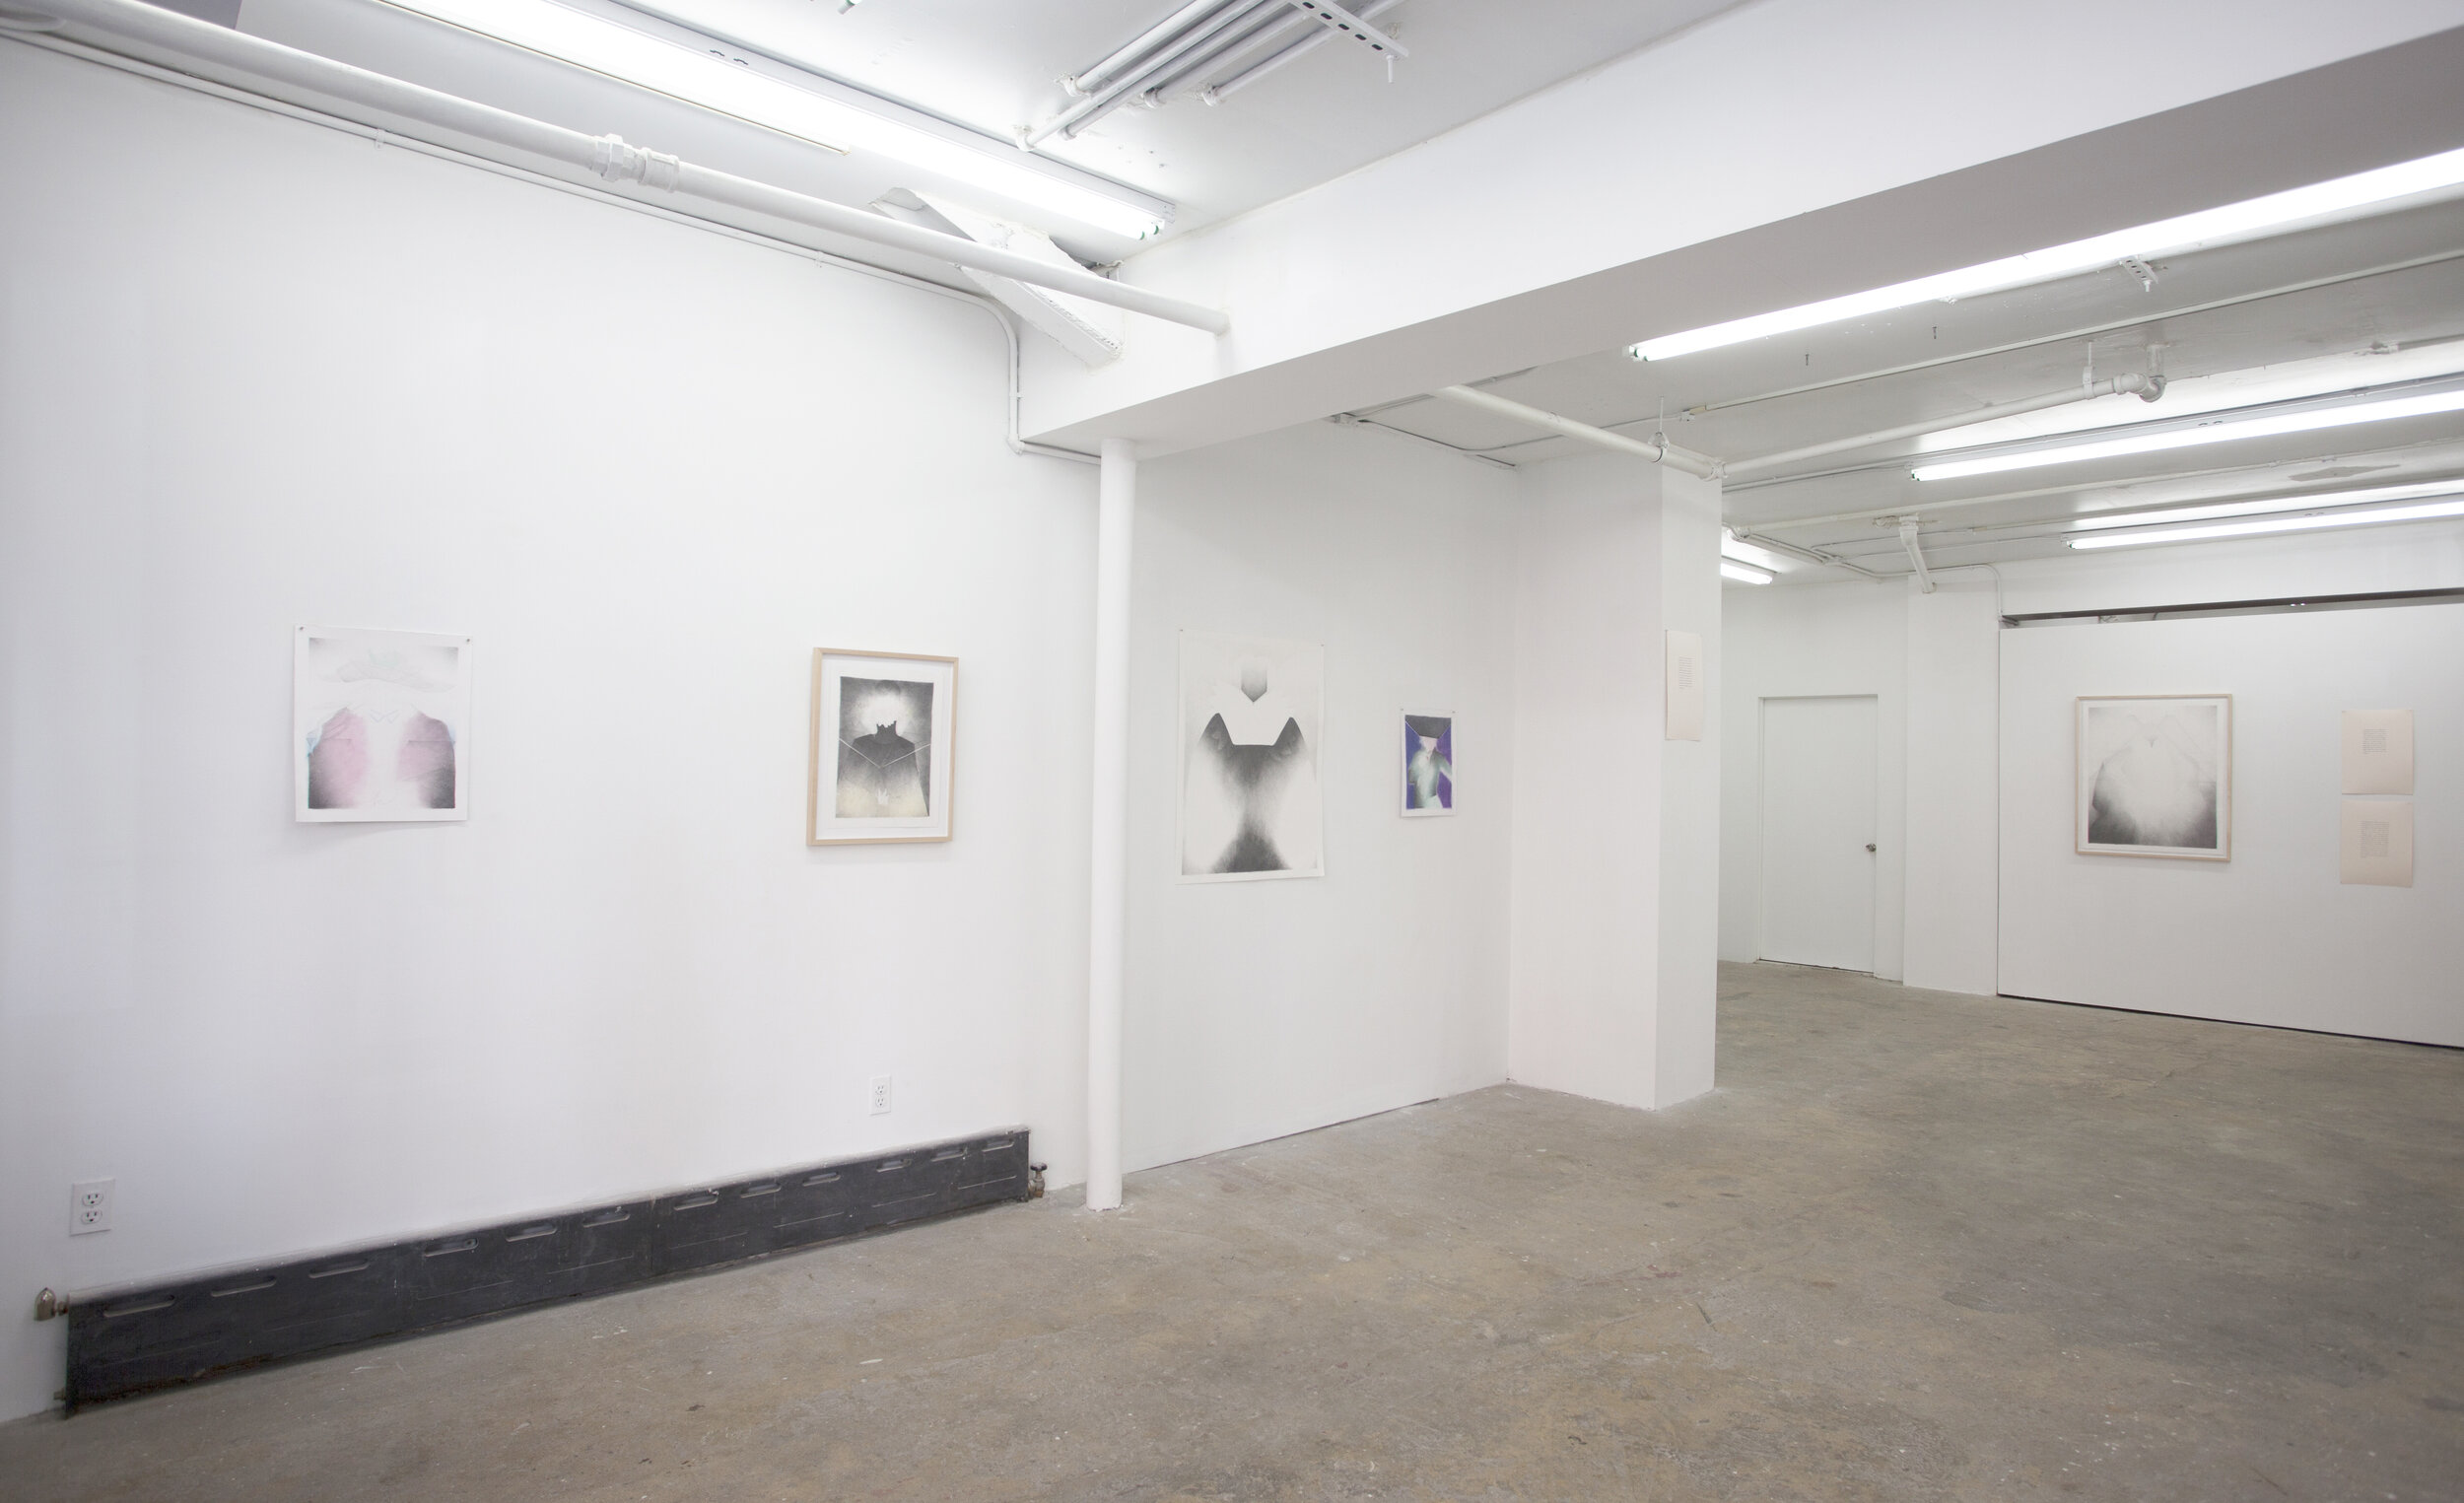 Installation images of works by Adam Hayes from Inter Canem et Lupum, at Cindy Rucker Gallery